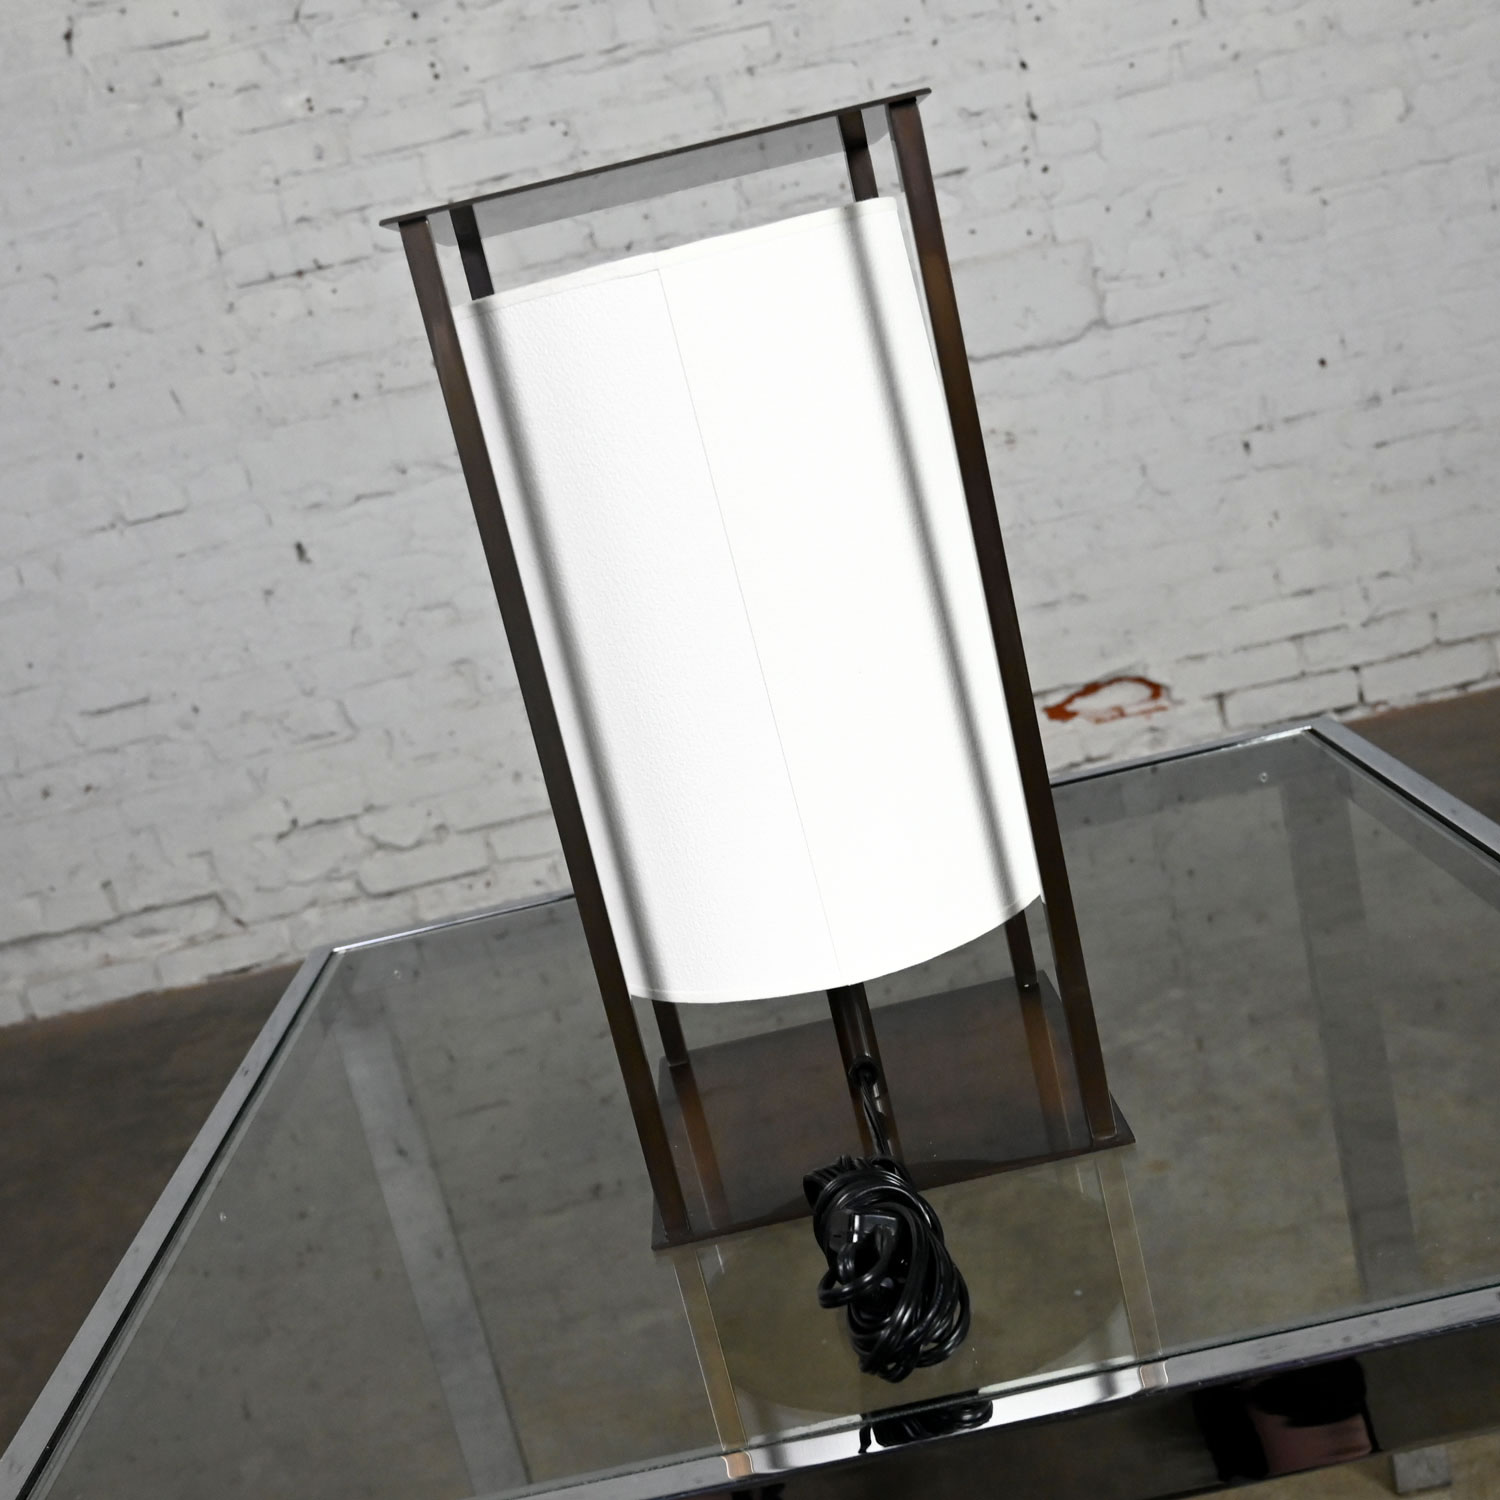 Metal Table Lamp with Floating Shade Attributed to Holly Hunt Lanternes II Collection